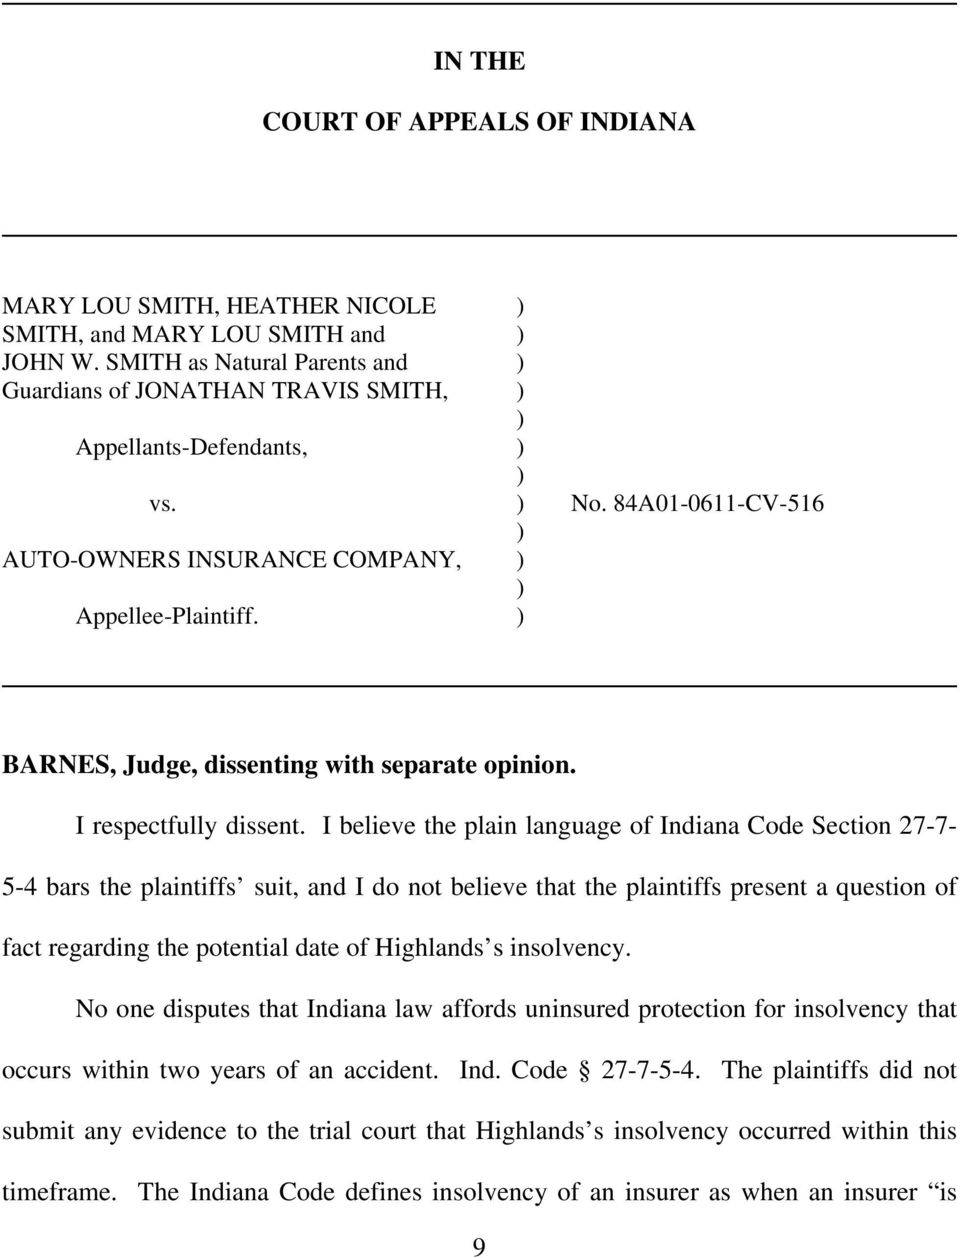 I believe the plain language of Indiana Code Section 27-7- 5-4 bars the plaintiffs suit, and I do not believe that the plaintiffs present a question of fact regarding the potential date of Highlands